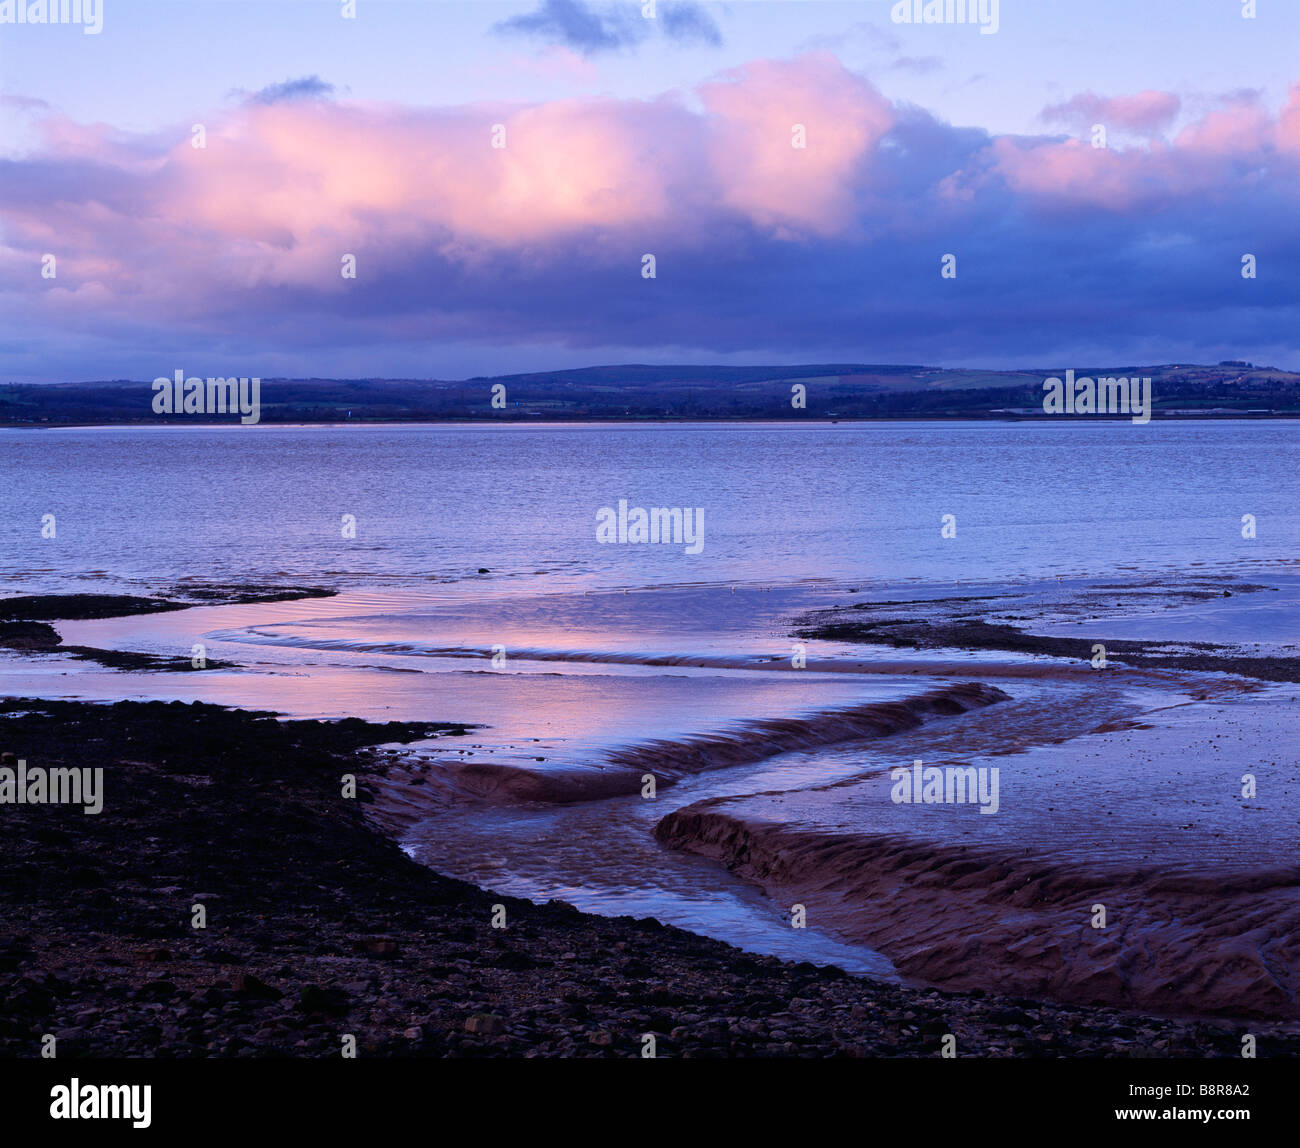 The River Severn Estuary viewed from Northwick Oaze at Redwick, Gloucestershire, England Stock Photo